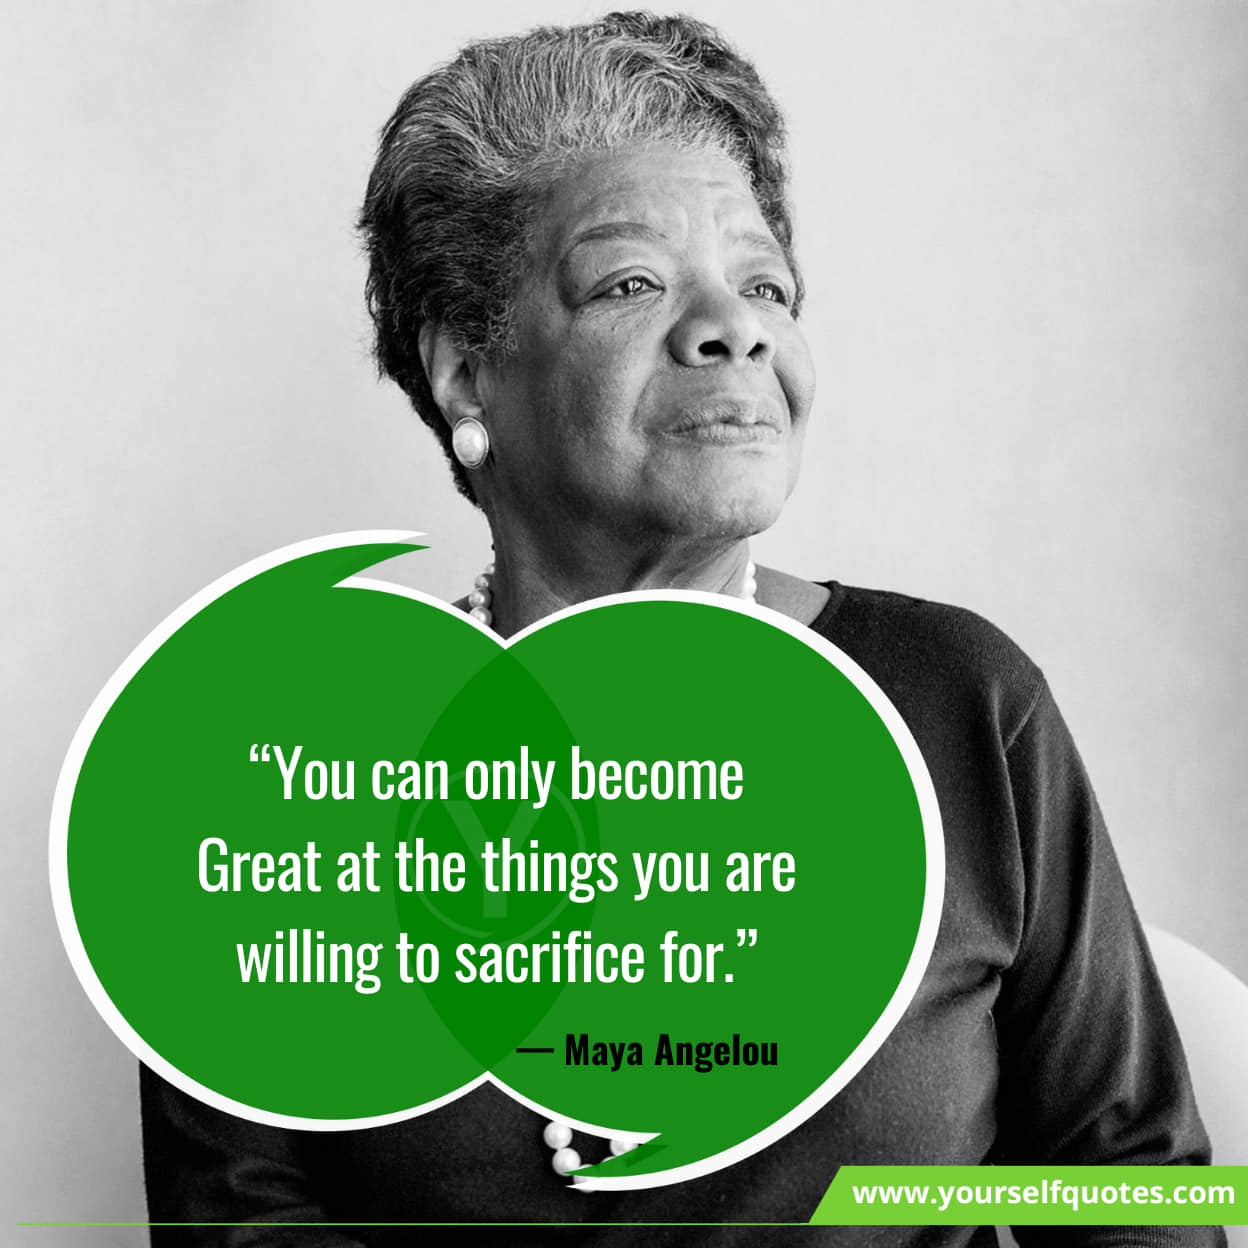 Maya Angelou's reflections on life and resilience